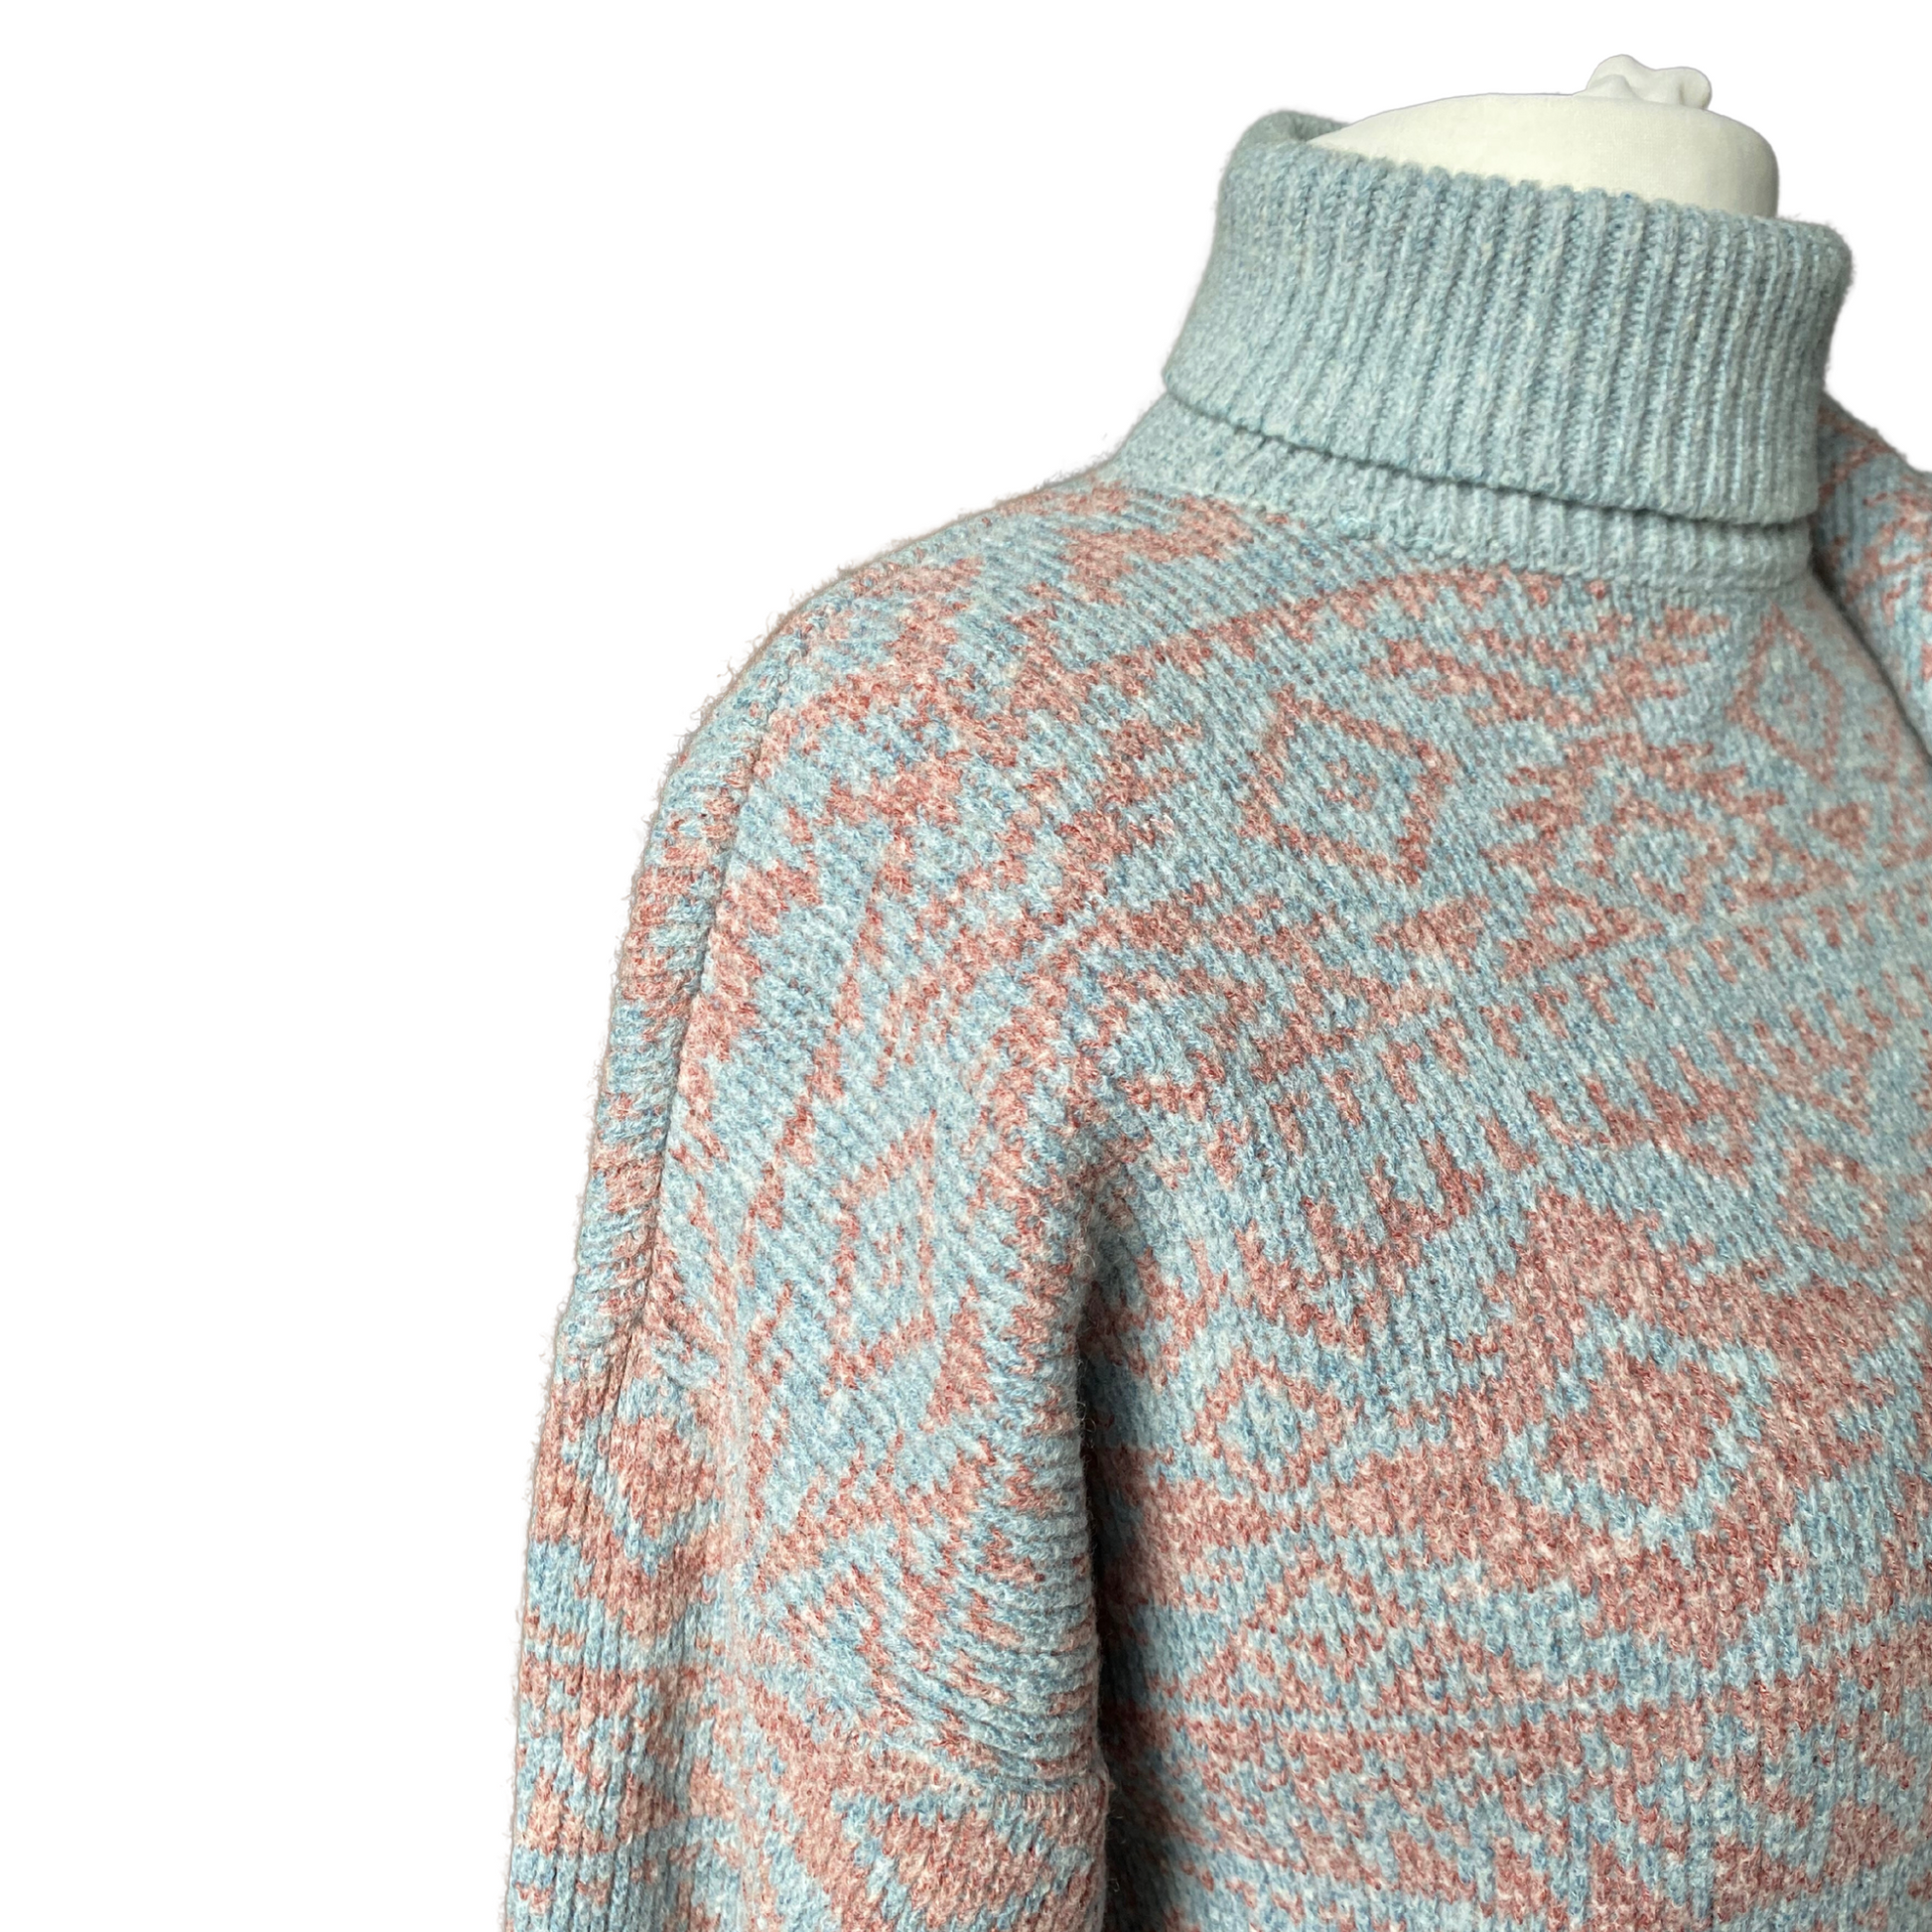 Vintage pale blue and pink jumper with ribbed polo neck and cuffs